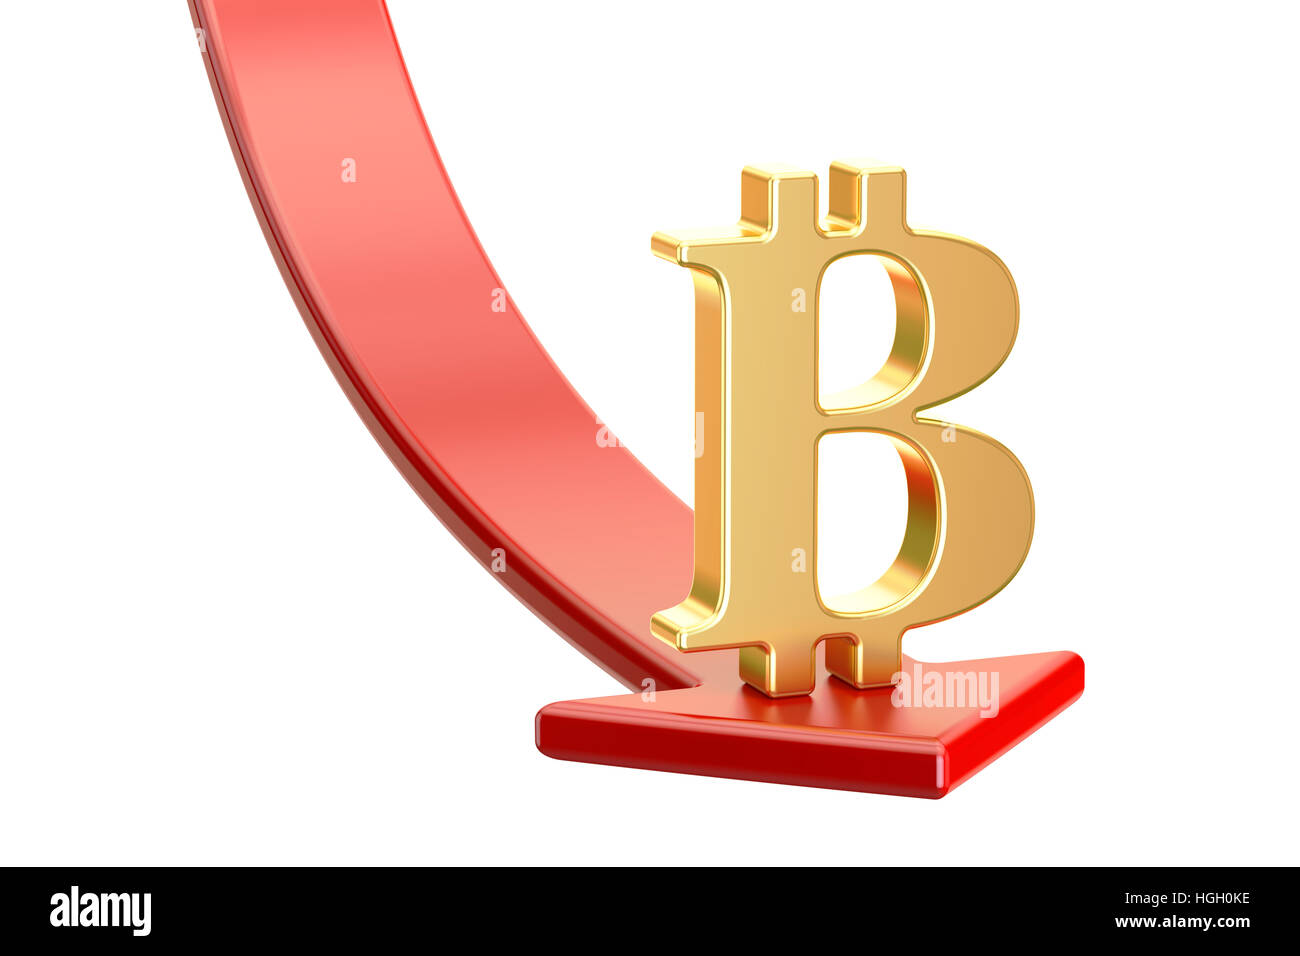 Falling red arrow with symbol of bitcoin, crisis concept. 3D rendering isolated on white background Stock Photo